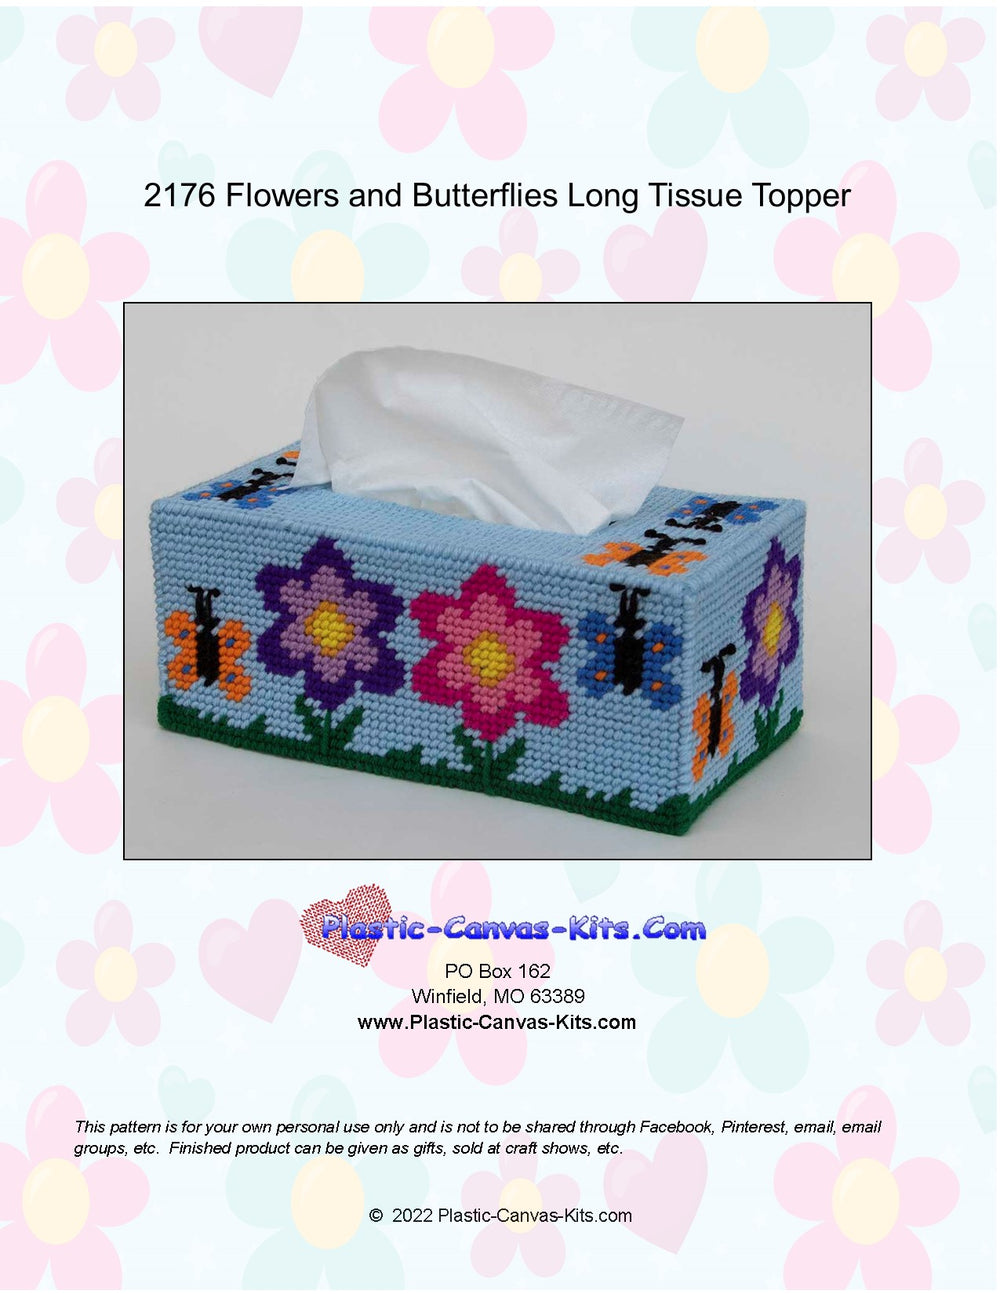 Flowers and Butterflies Tissue Topper